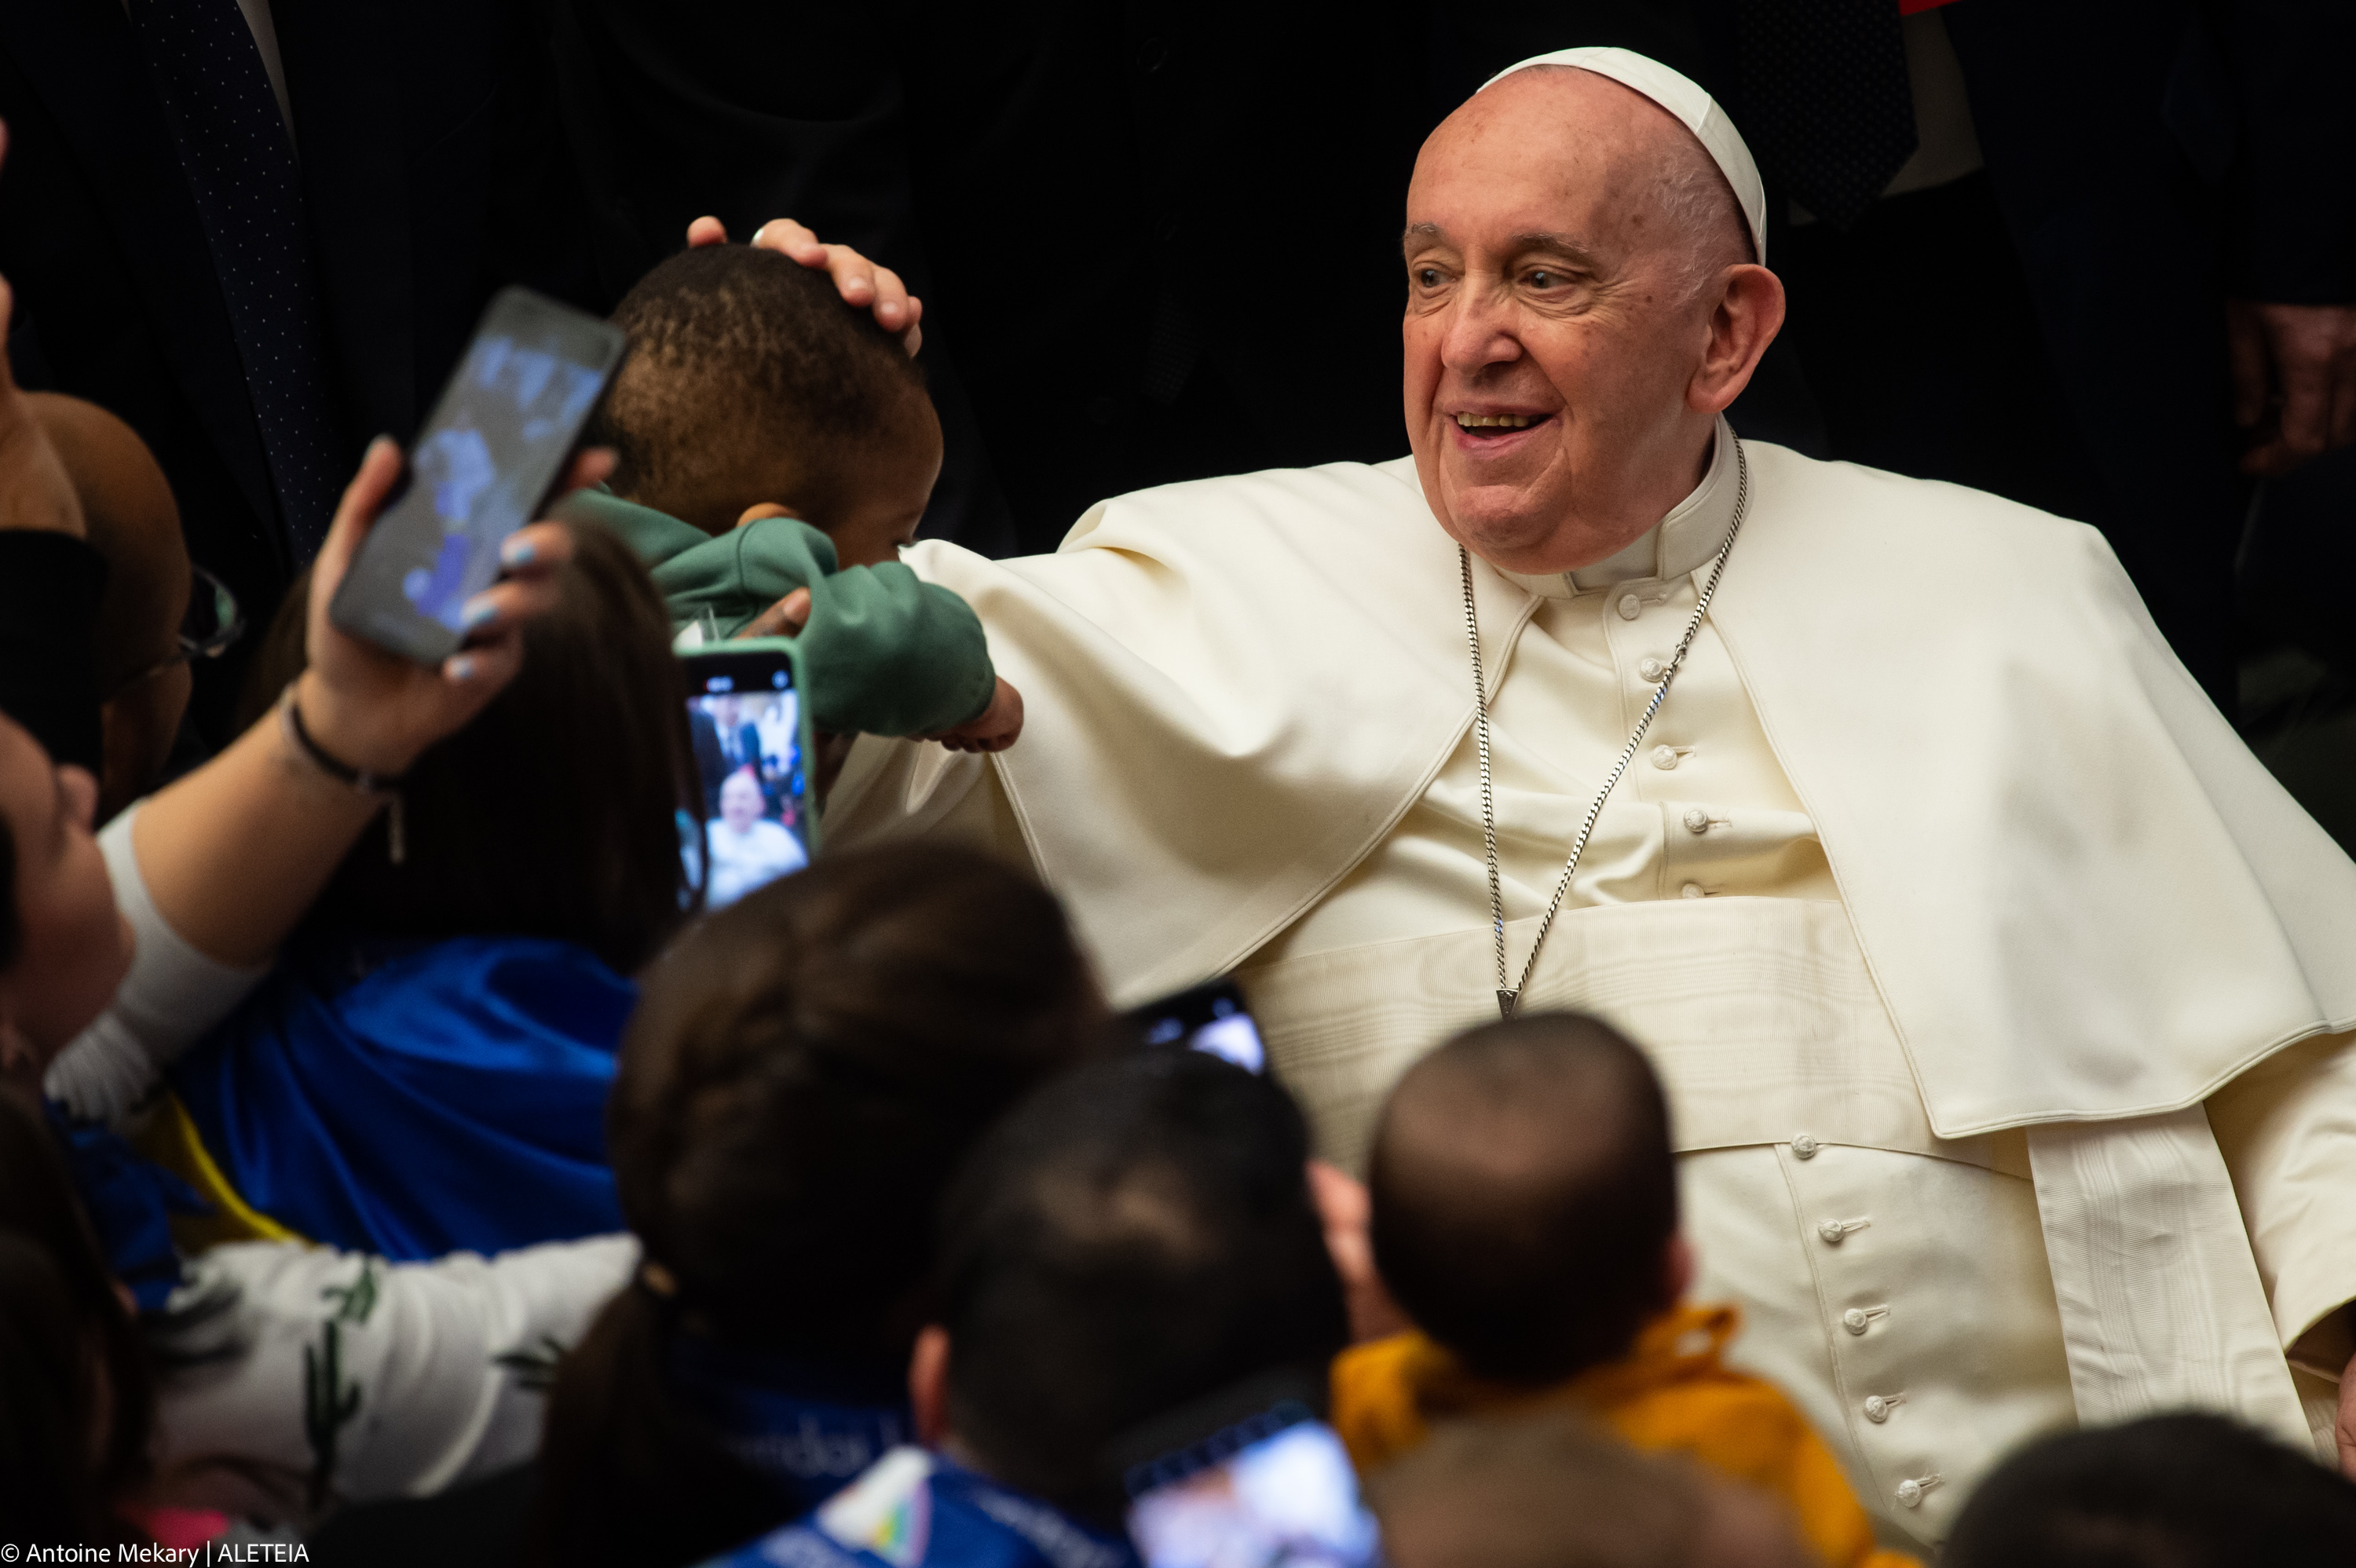 Pope Francis audience to refugees who arrived under humanitarian corridors programme